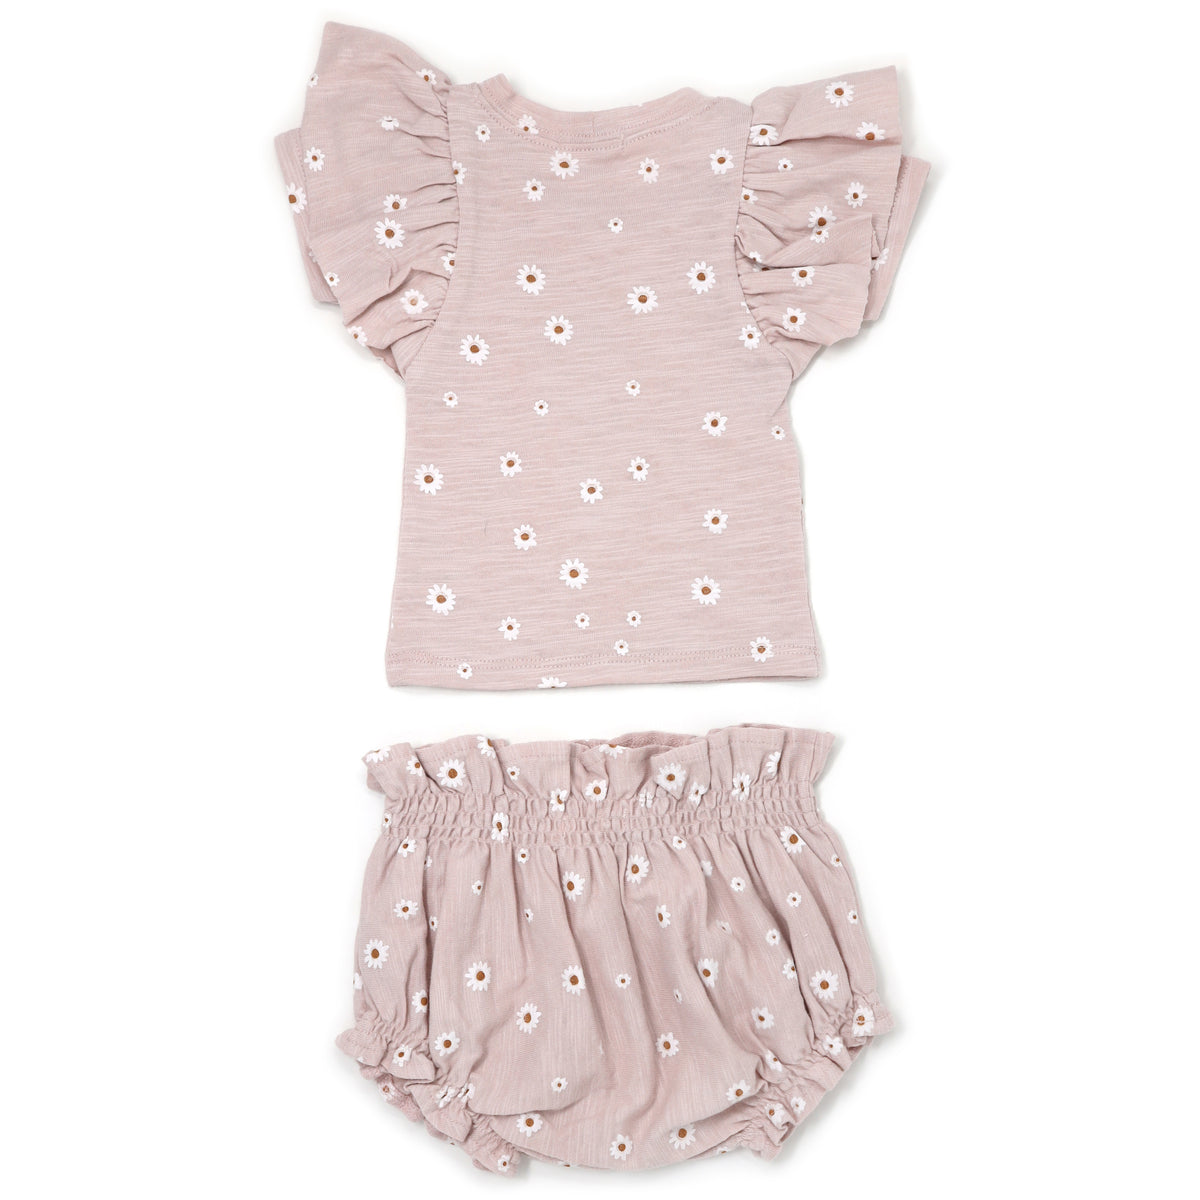 oh baby! Butterfly Sleeve High Waisted Tushie Set - White Mini Daisies Print - Blush